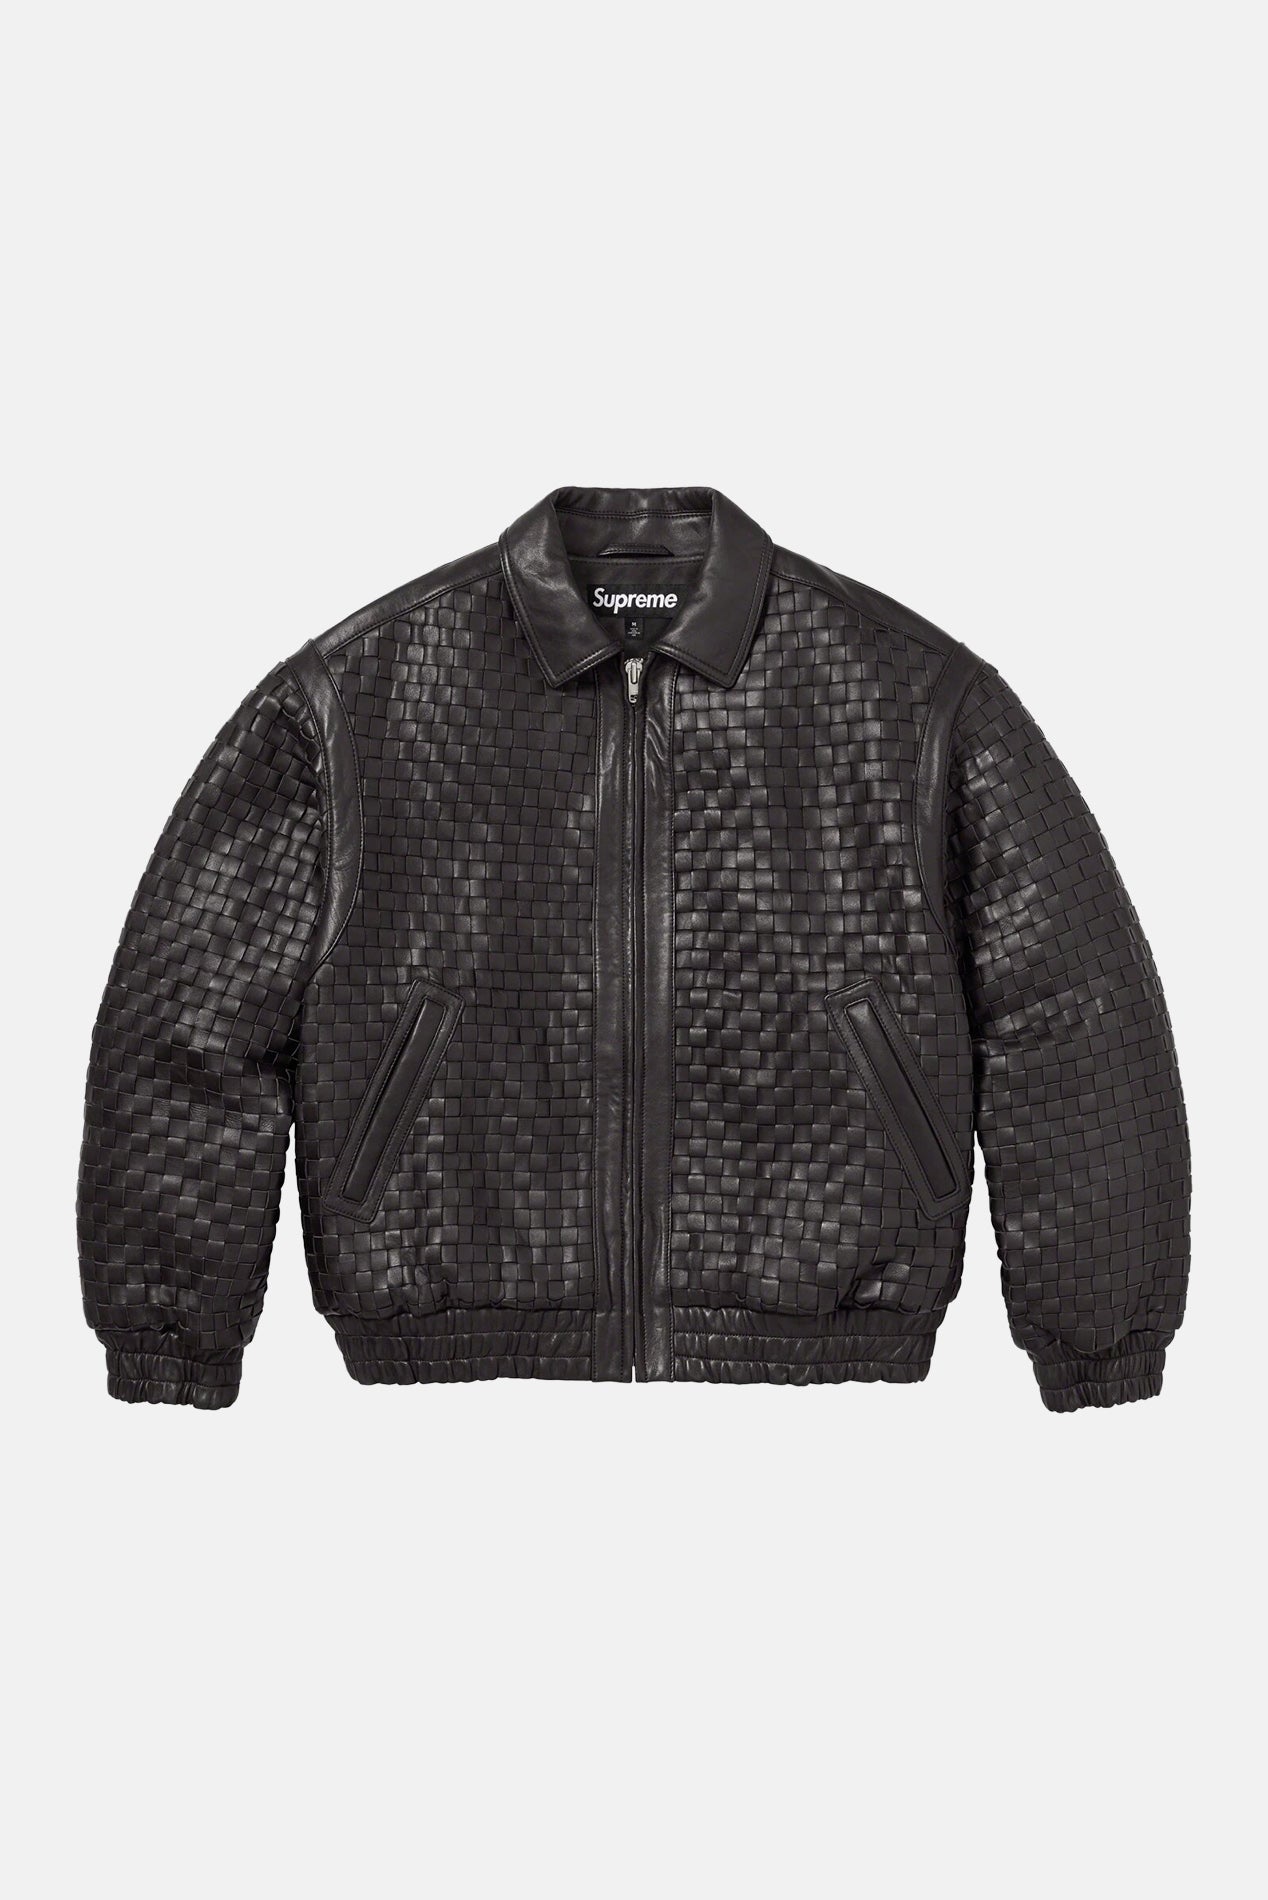 Supreme Woven Leather Varsity Jacket in Black, Size Small - Outerwear